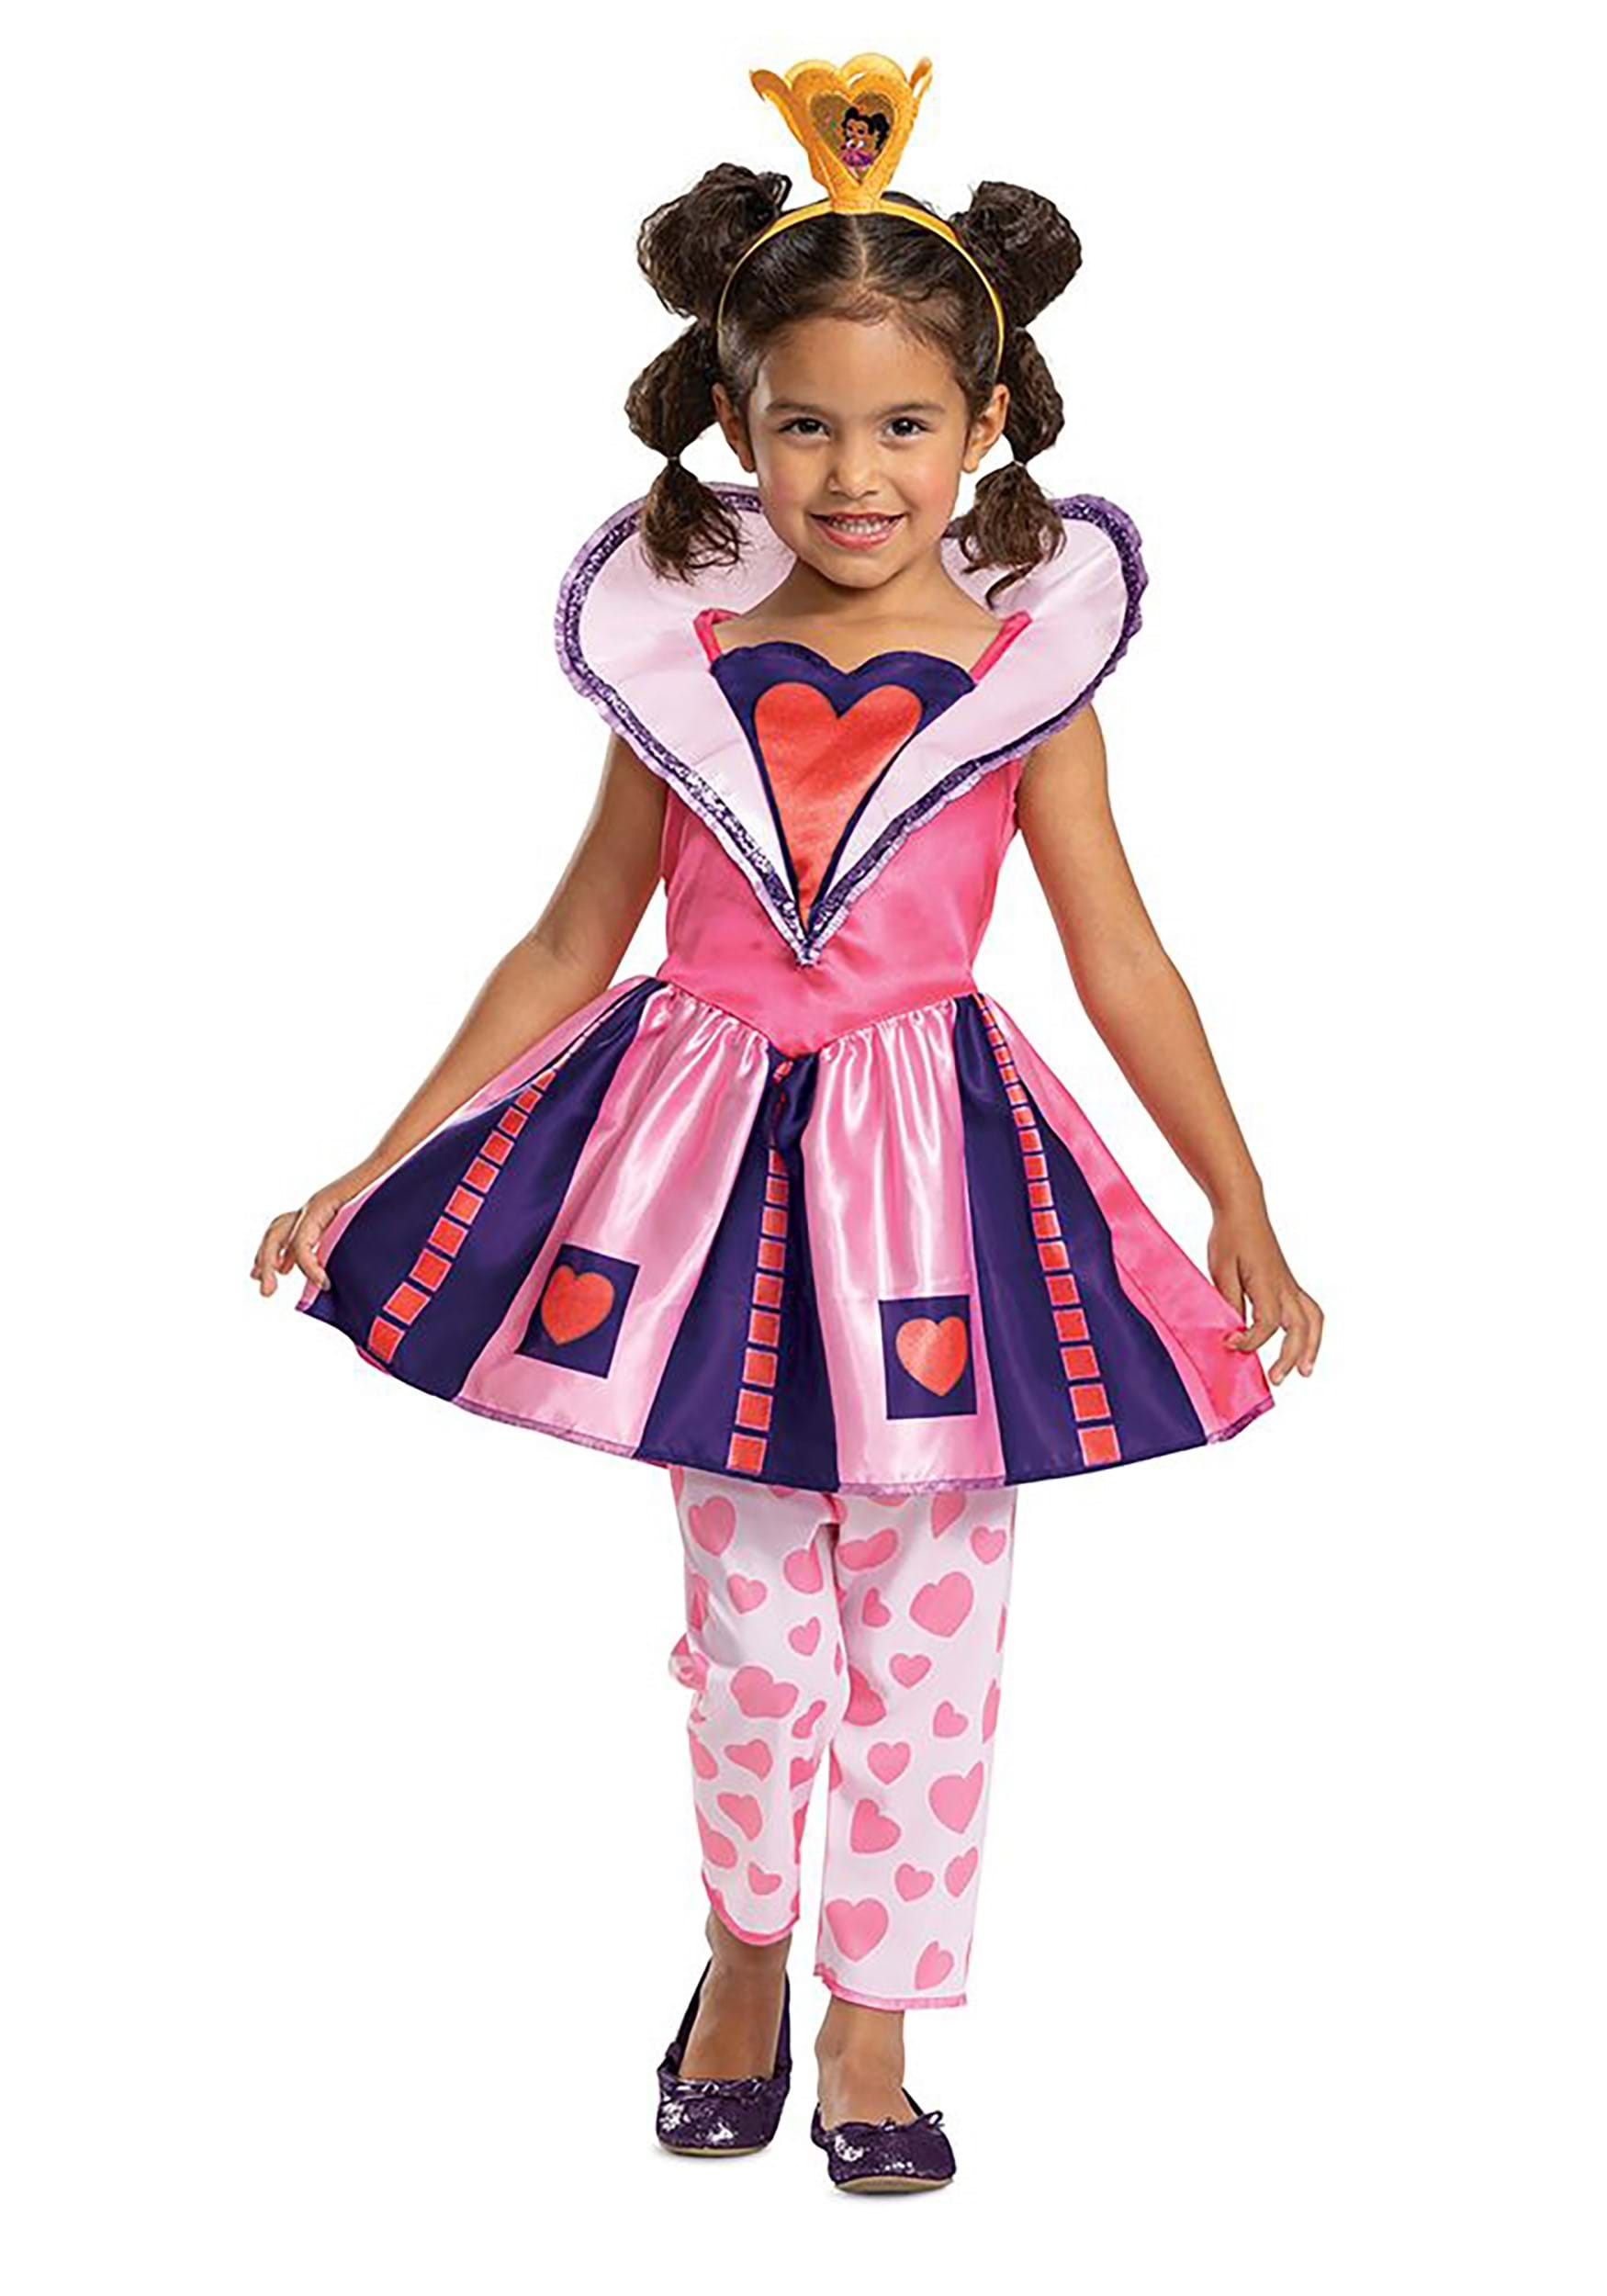 https://images.halloweencostumes.com/products/82896/1-1/alices-bakery-toddler-classic-rosa-costume.jpg